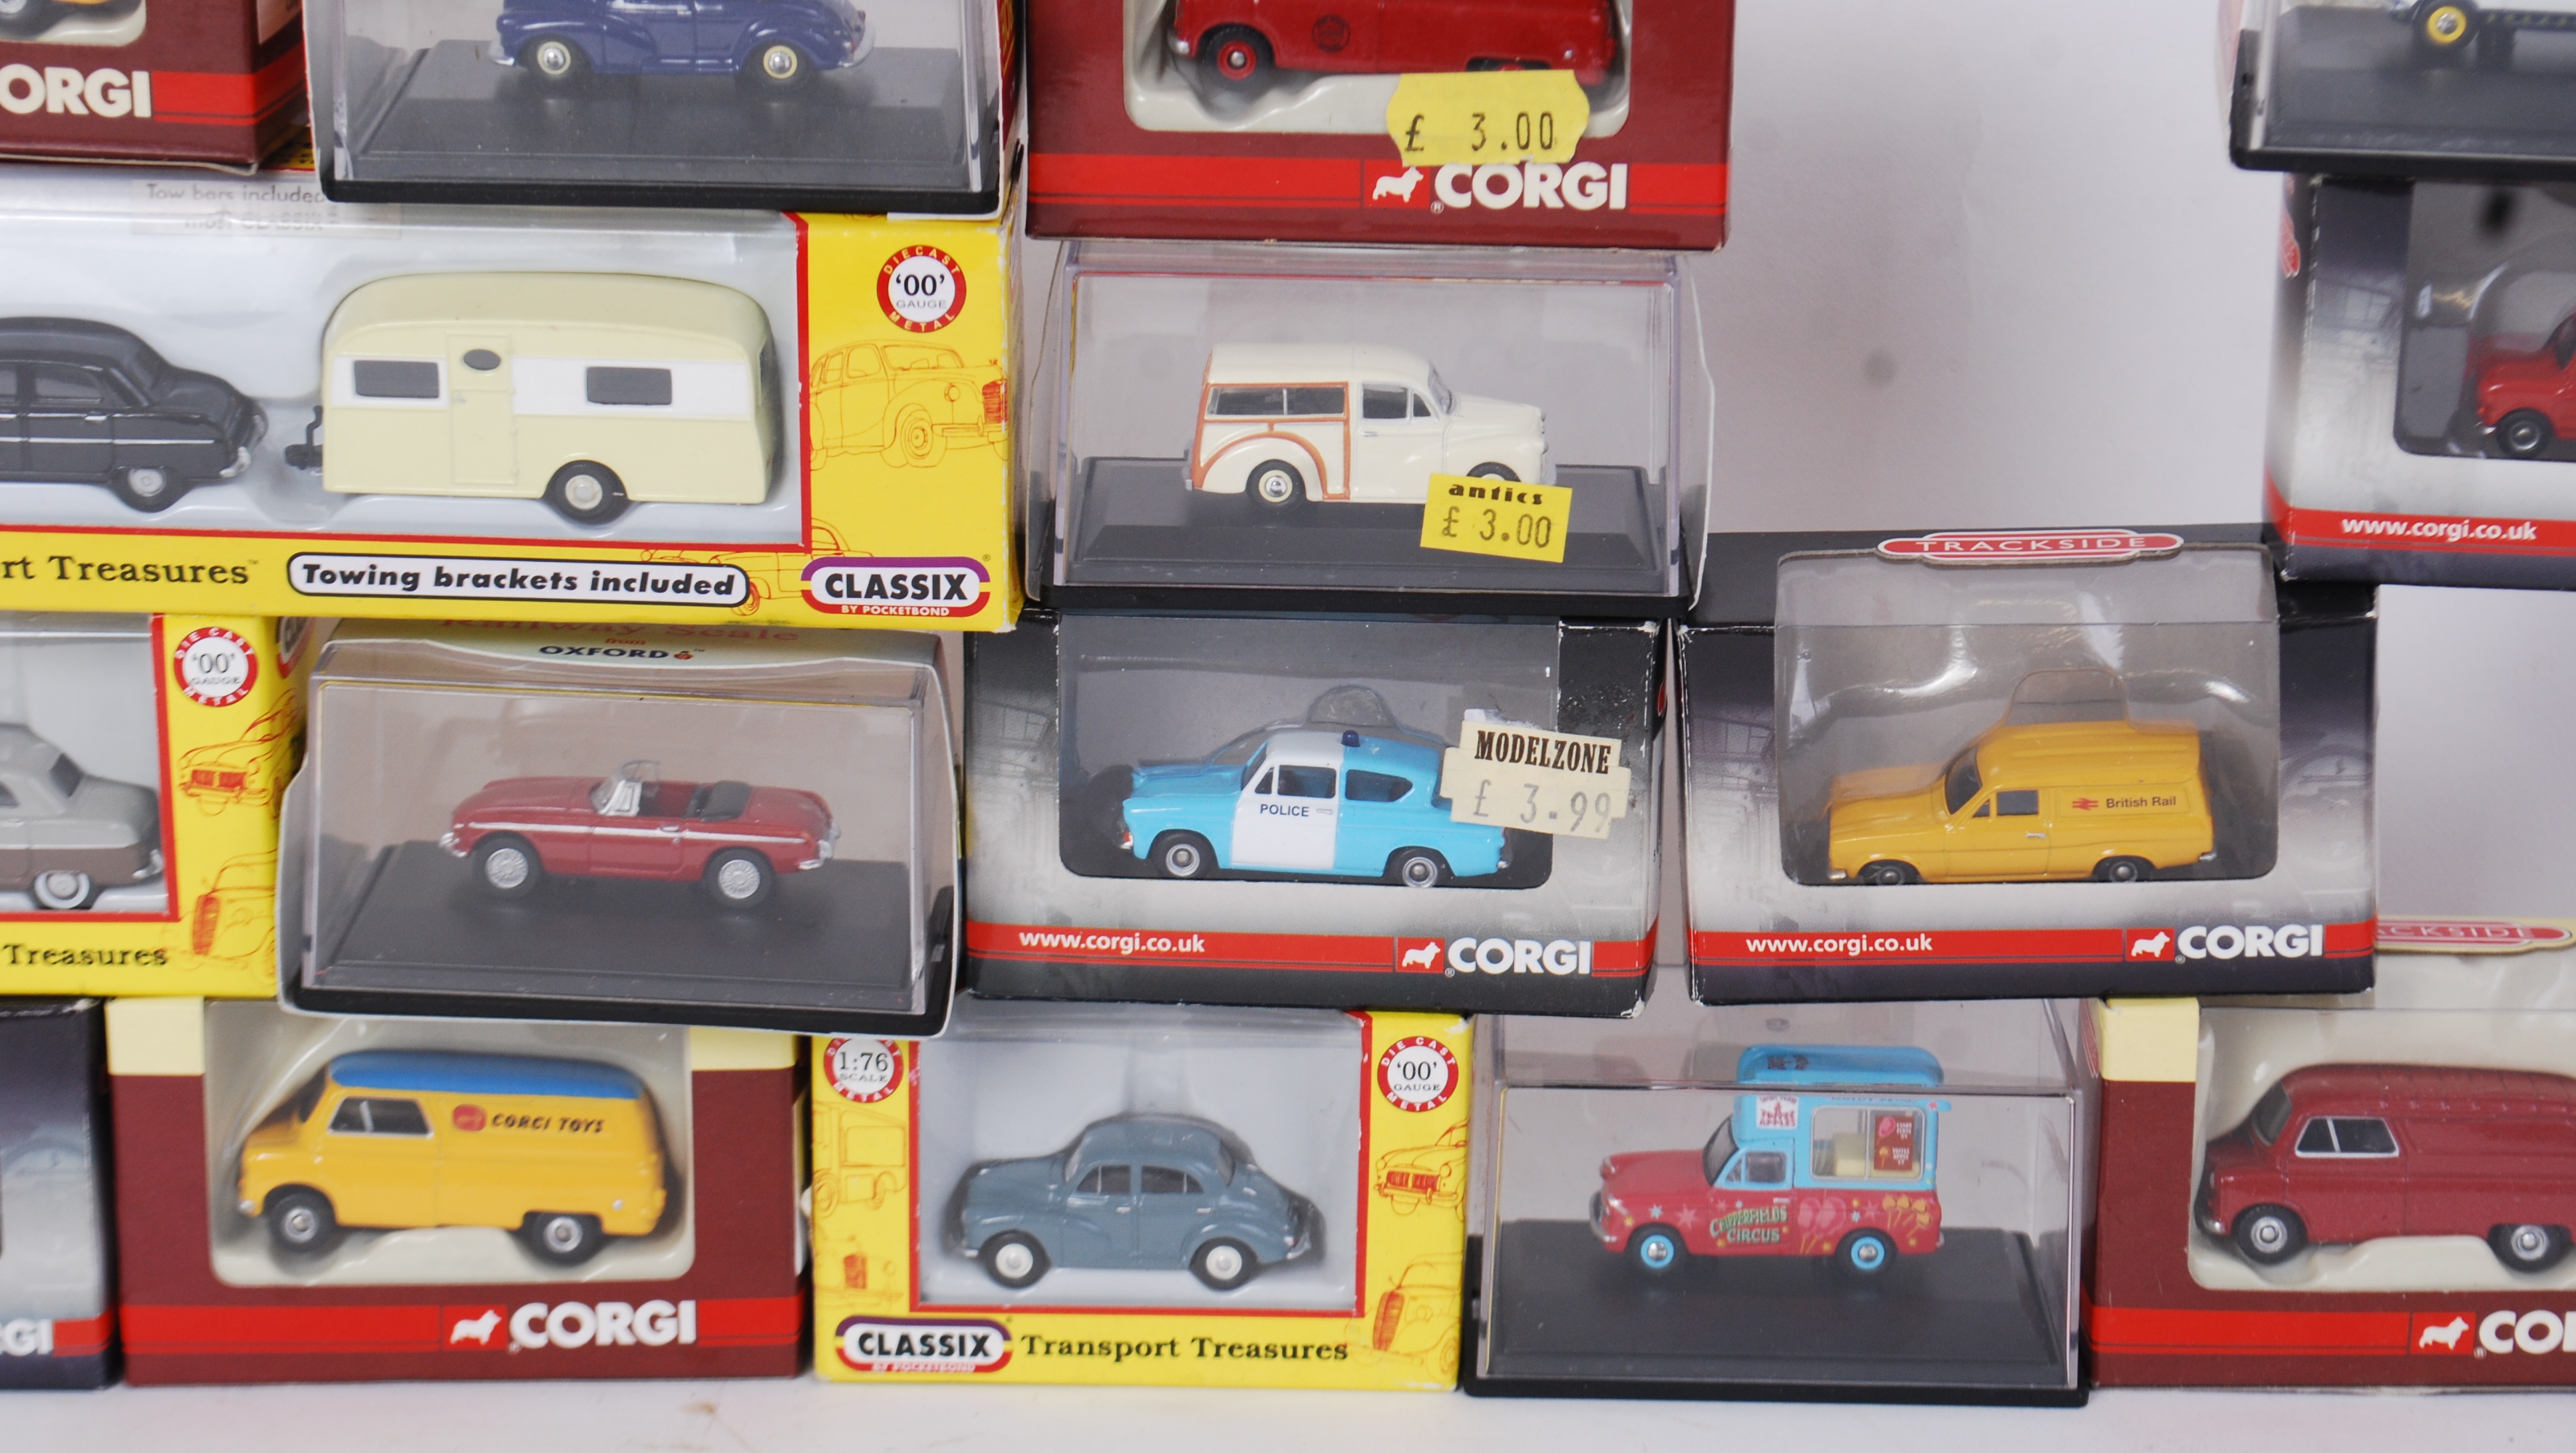 1:76 SCALE: A collection of approx 30x 1:76 scale diecast model cars. All within the original boxes. - Image 3 of 3